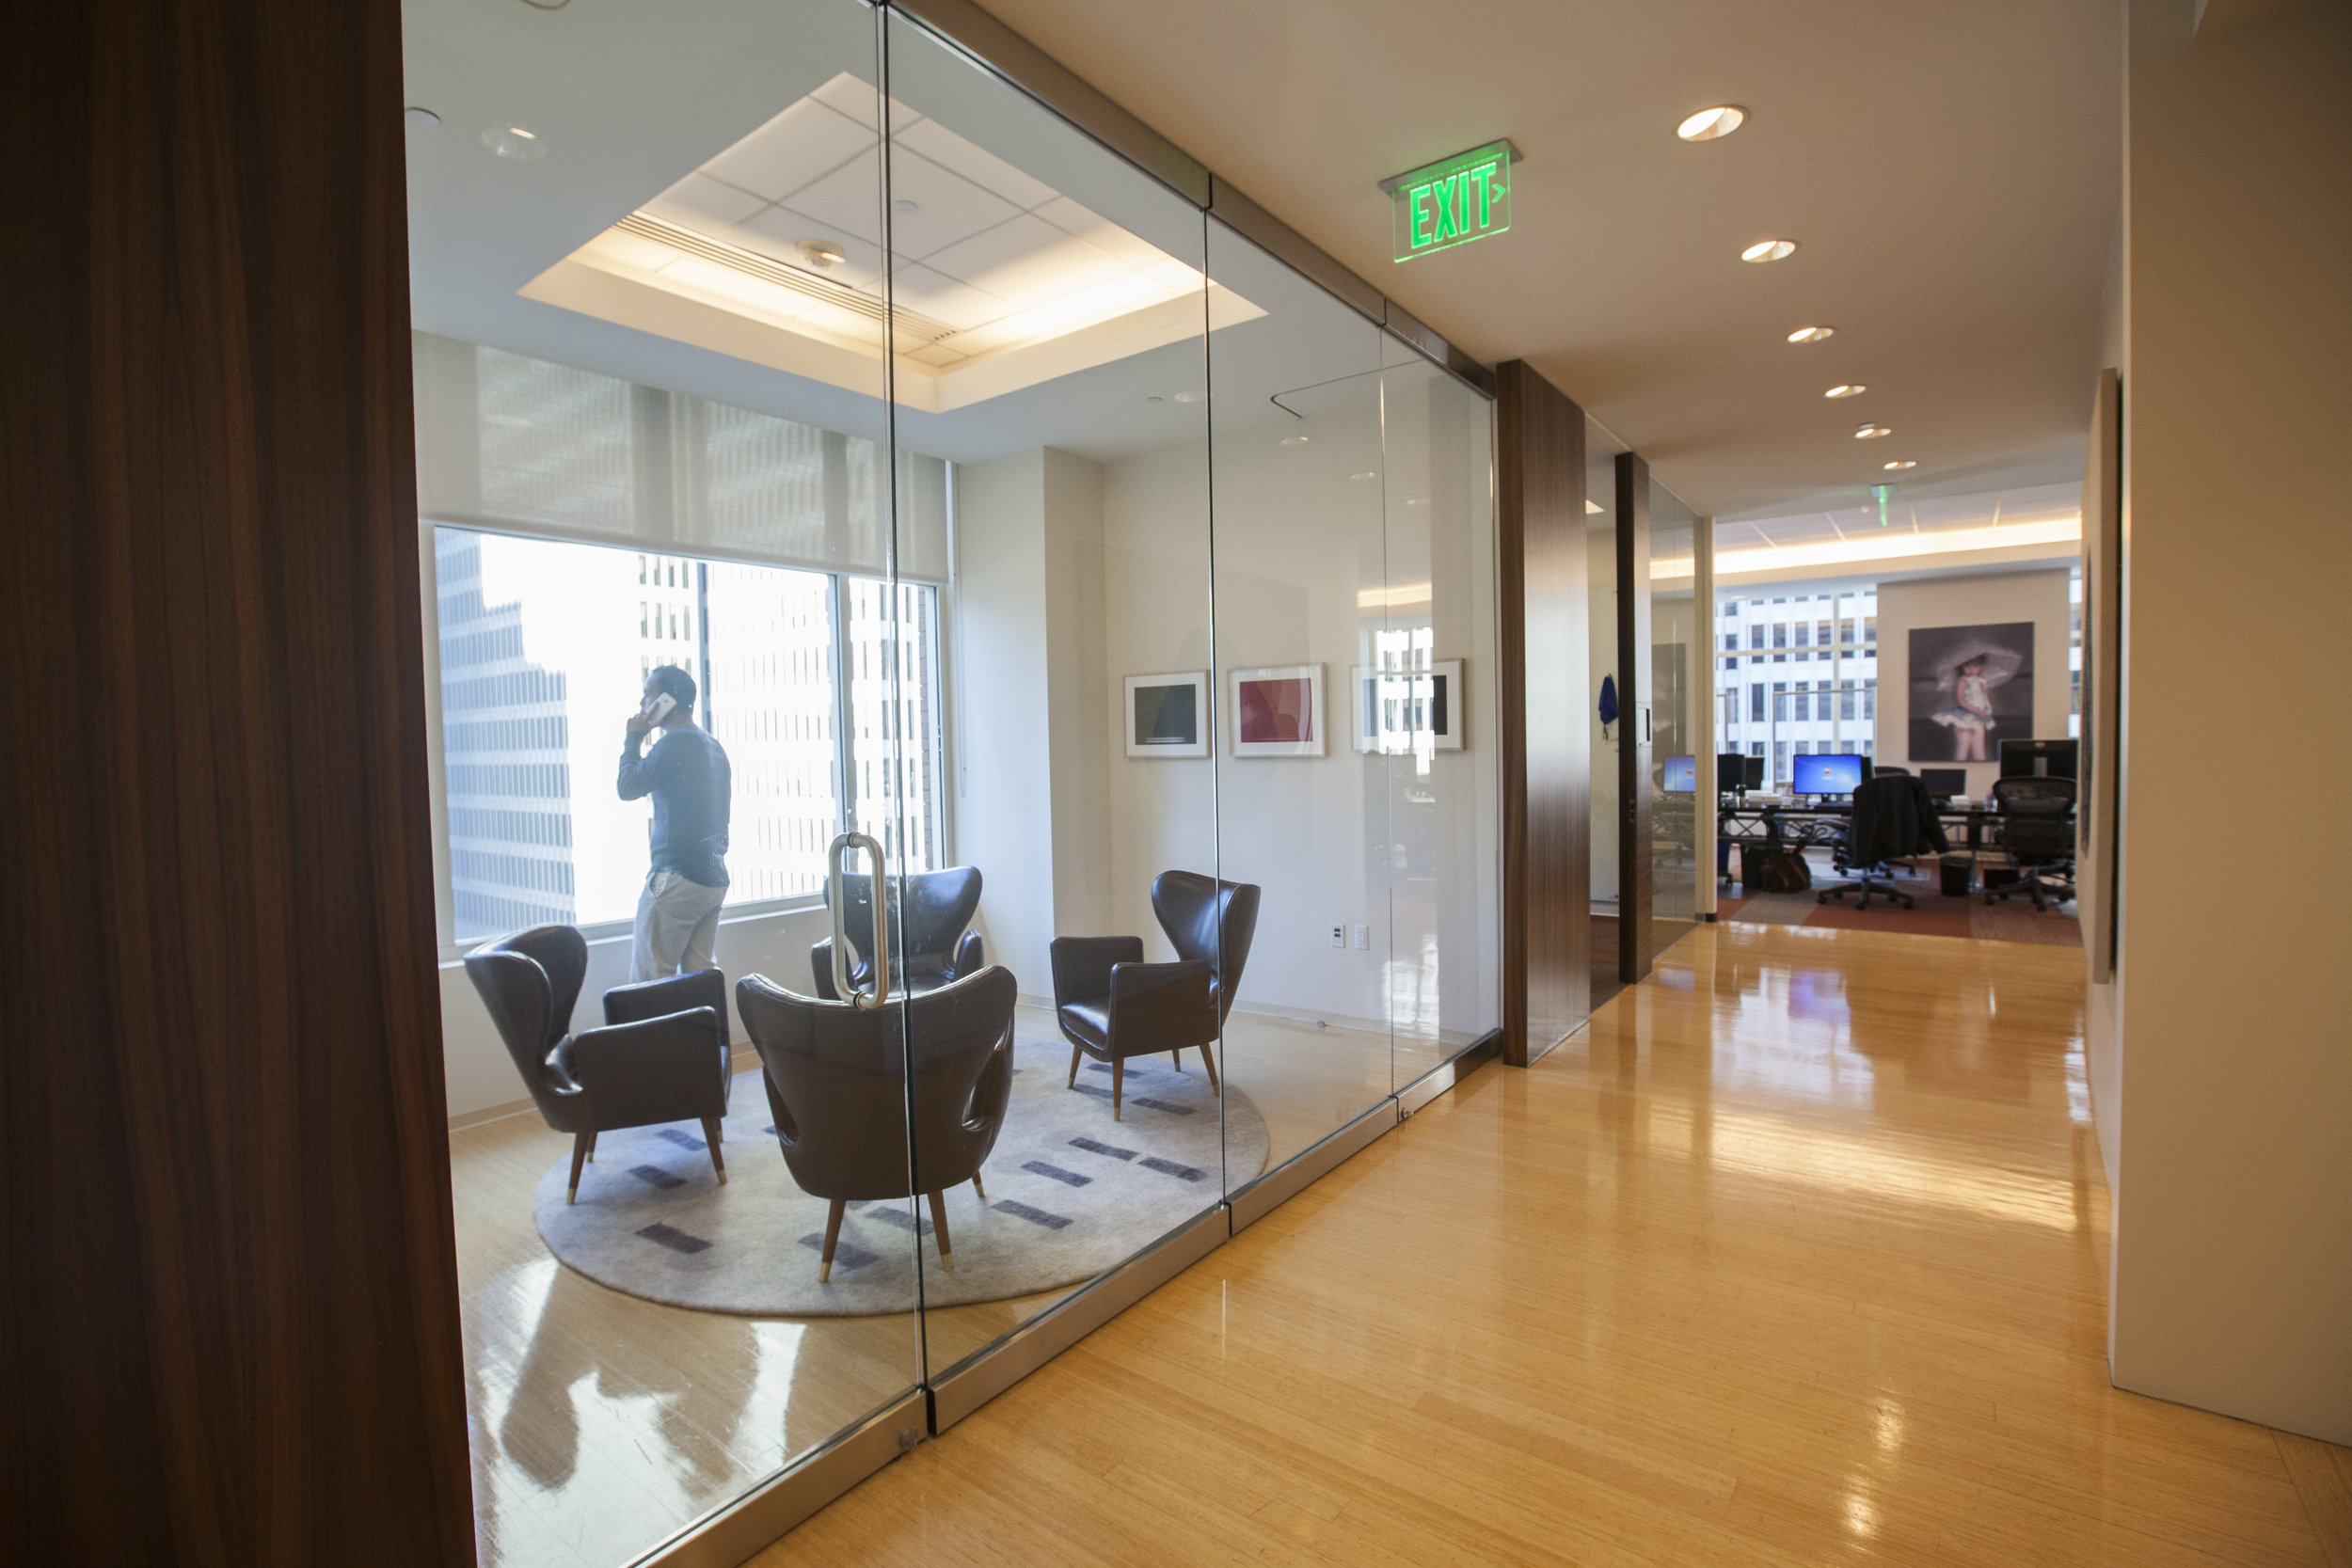  As you round the corner of the elevator lobby, the hall leads you to a private meeting space flanked by offices and conference rooms. Now with this operational glass wall it has the ability to be fully closed off with a door, or a fully open space. 